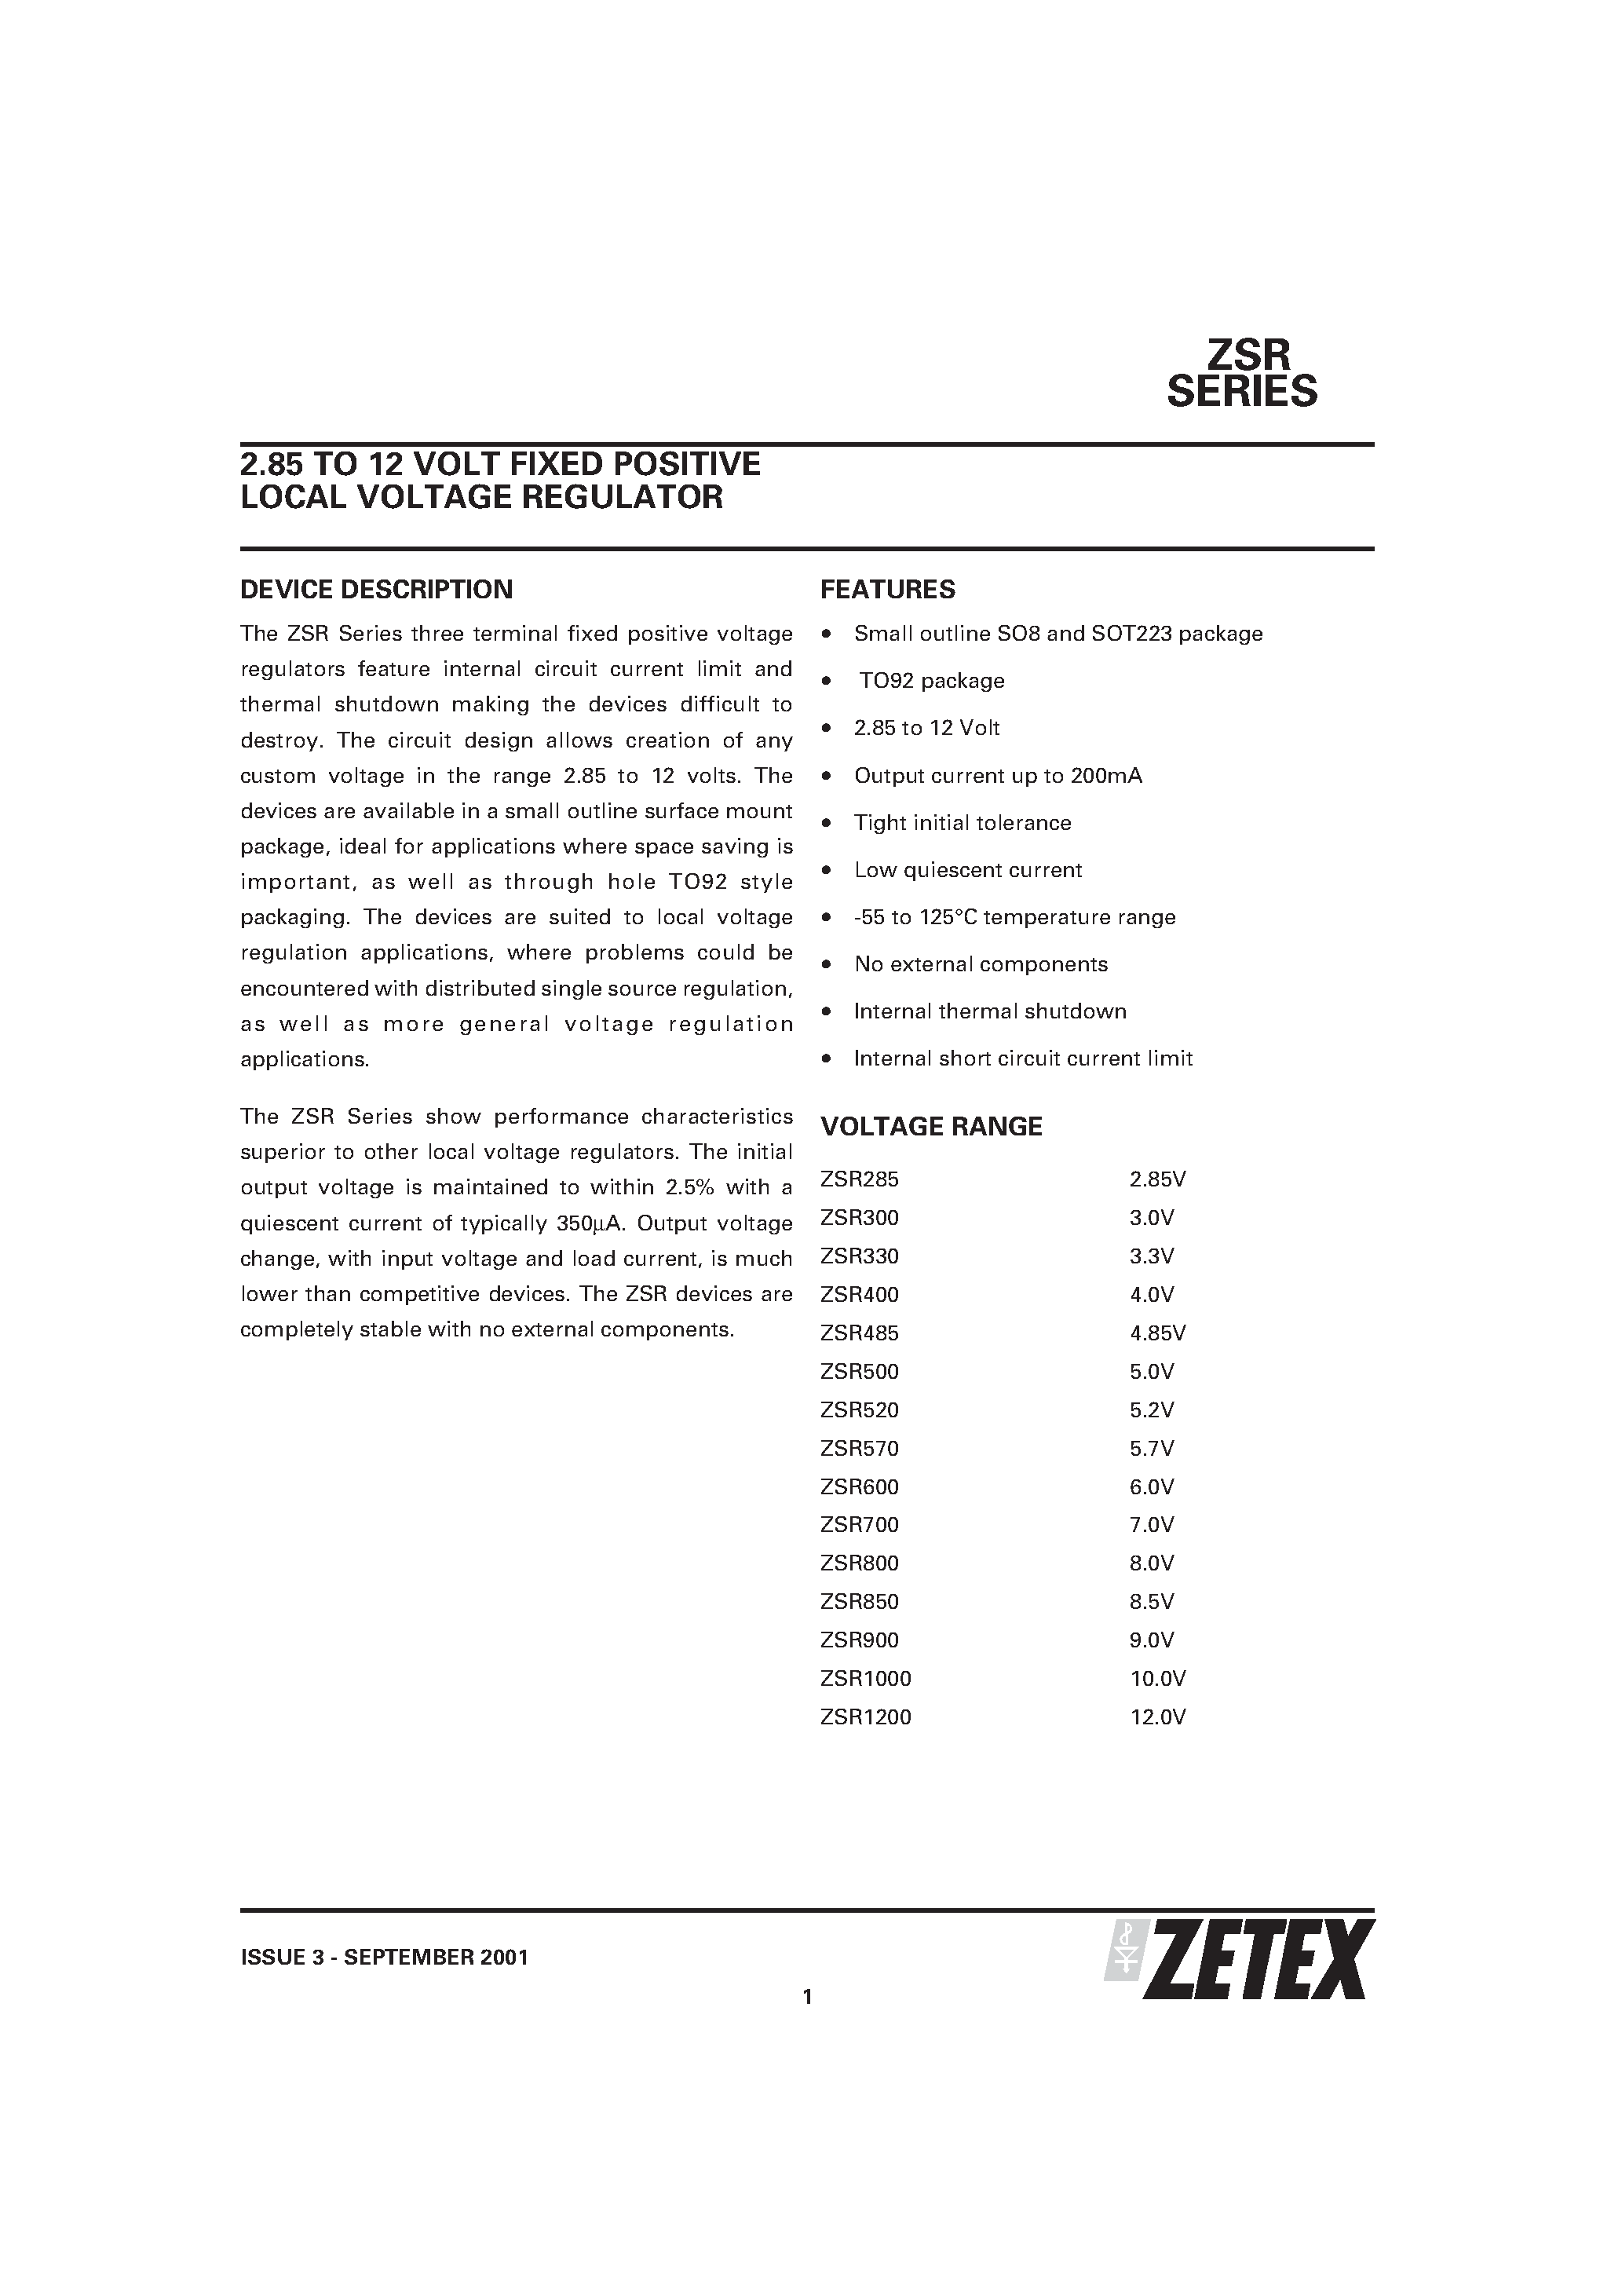 Datasheet ZSR500C - 2.85 TO 12 VOLT FIXED POSITIVE LOCAL VOLTAGE REGULATOR page 1